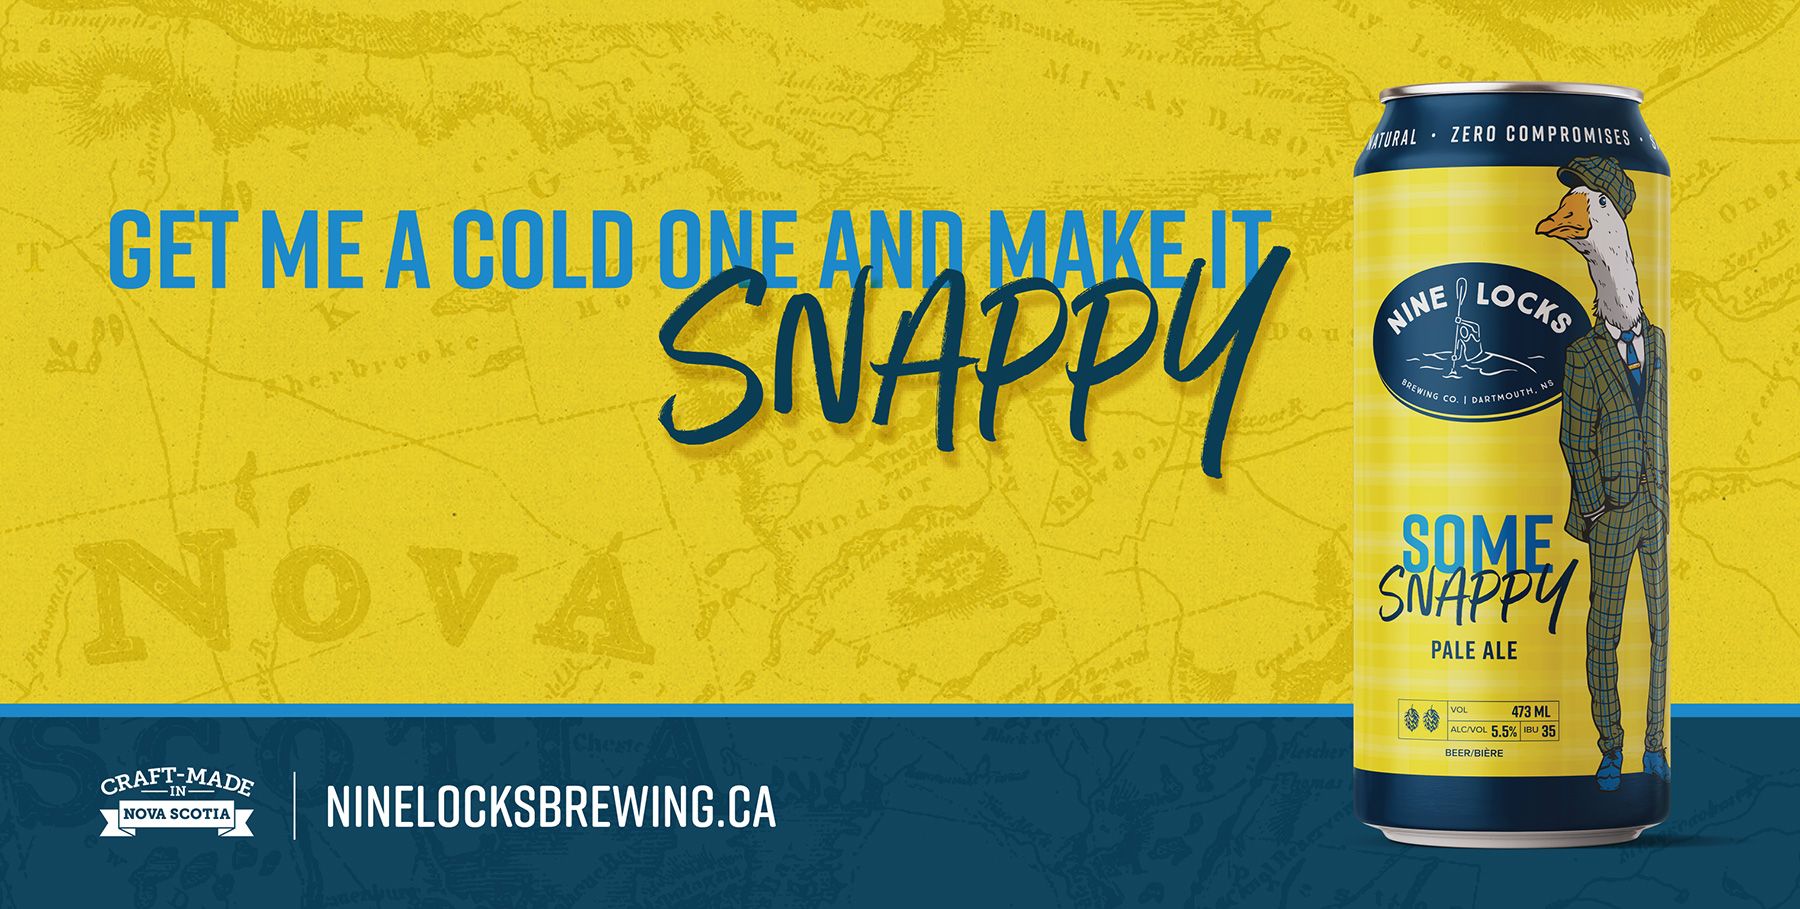 Ad banner of Nine Locks 'Some Snappy' pale ale with suited goose can on a yellow background with a navy border with link 